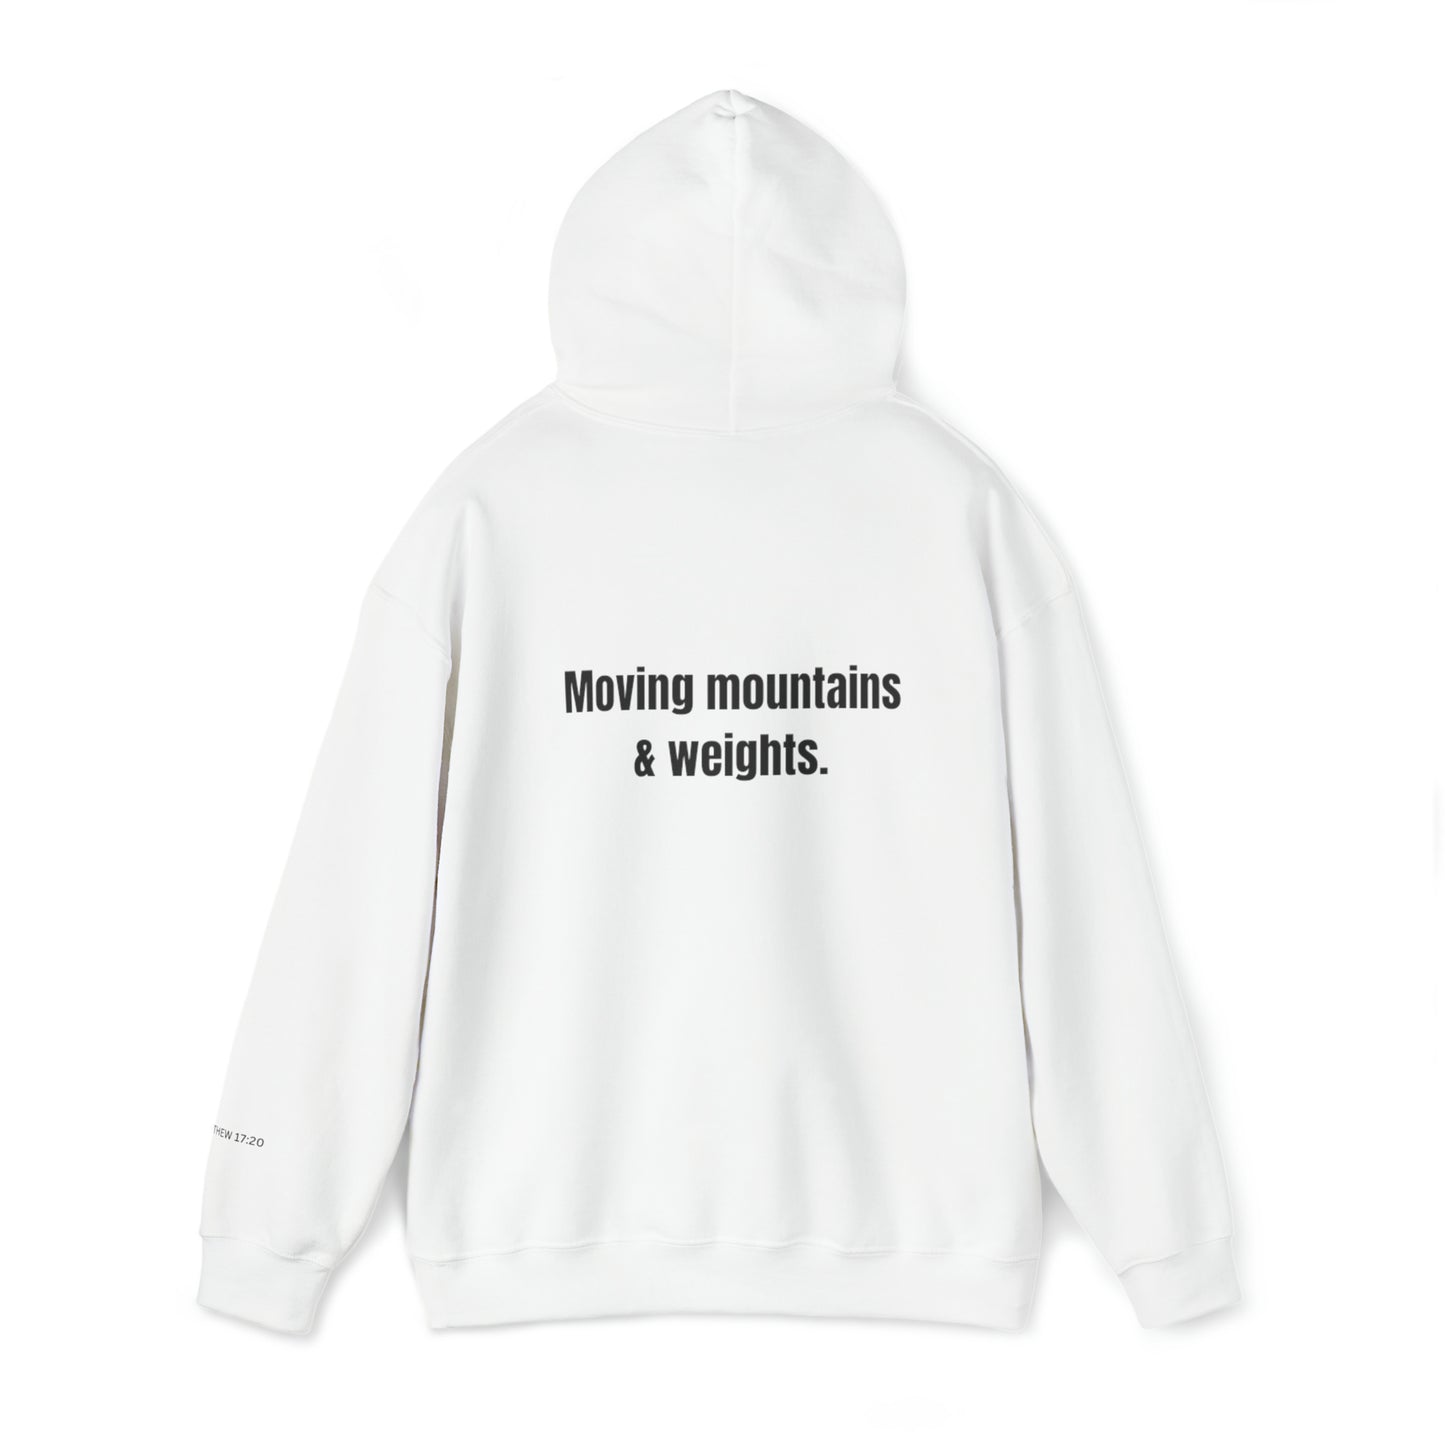 'Moving Mountains & Weights' Unisex Hooded Sweatshirt with Black Logo